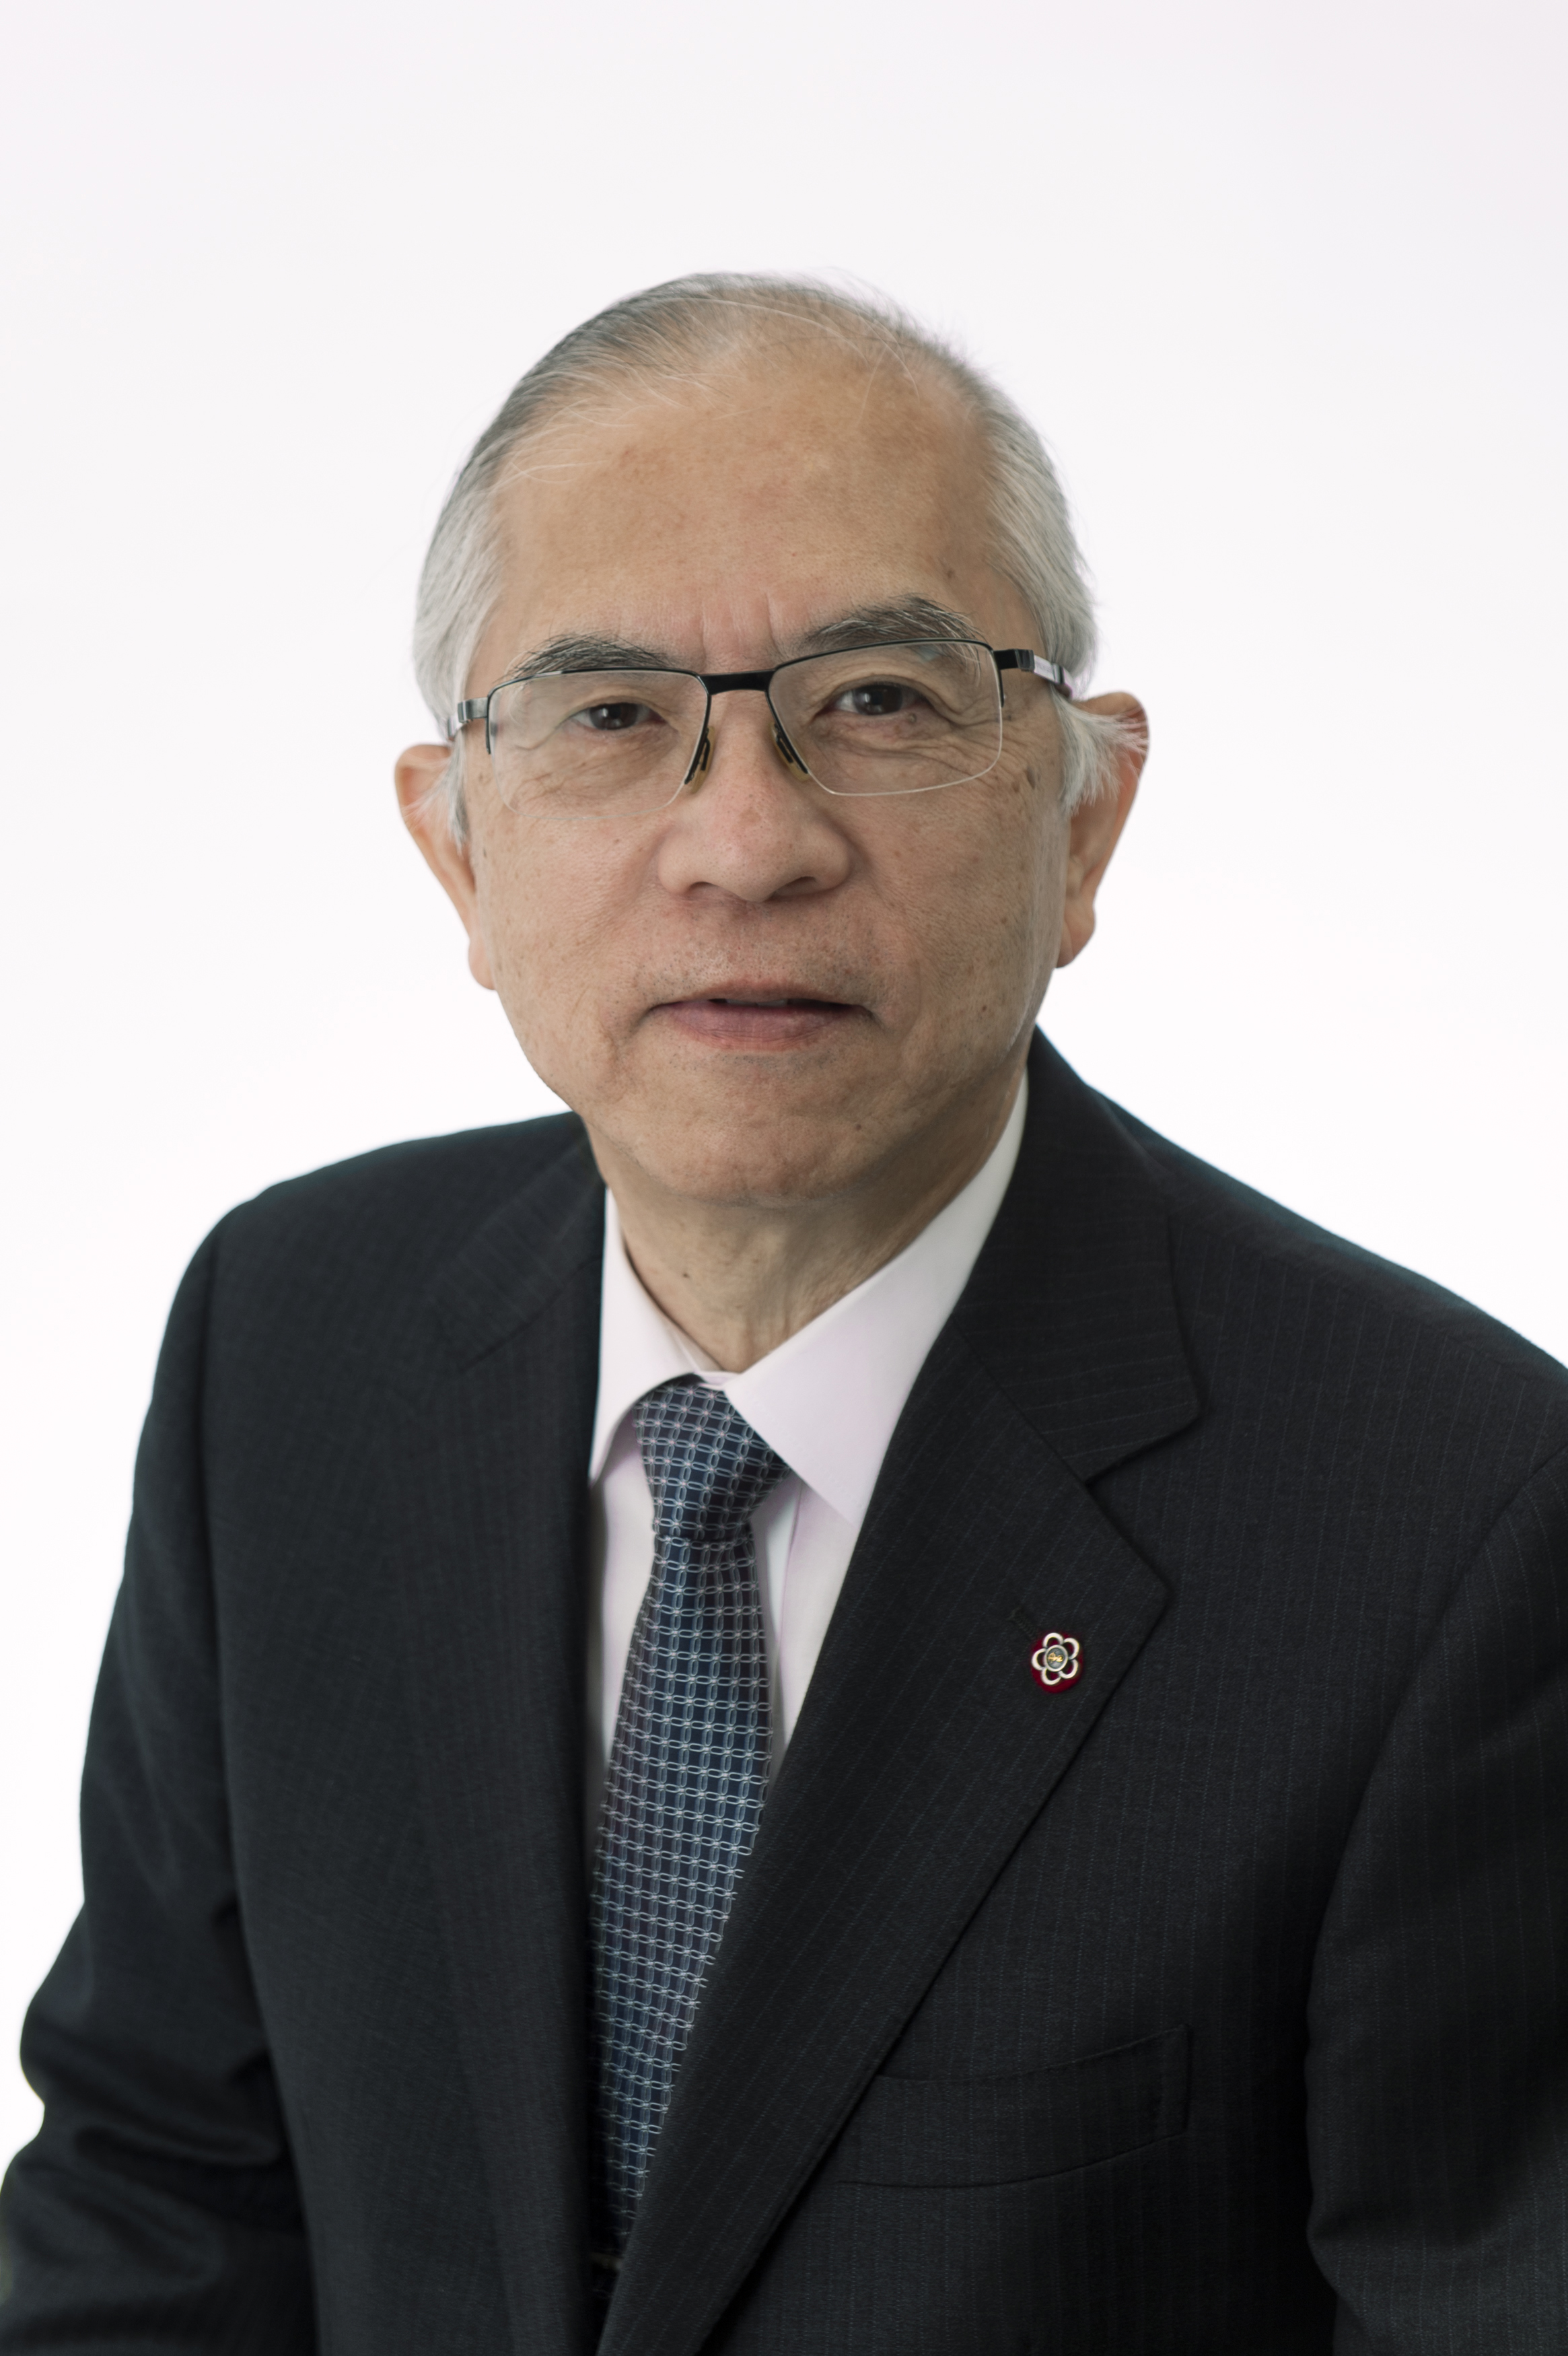 Portrait of Mr. Yoshinaga, Director General of the National Diet Library